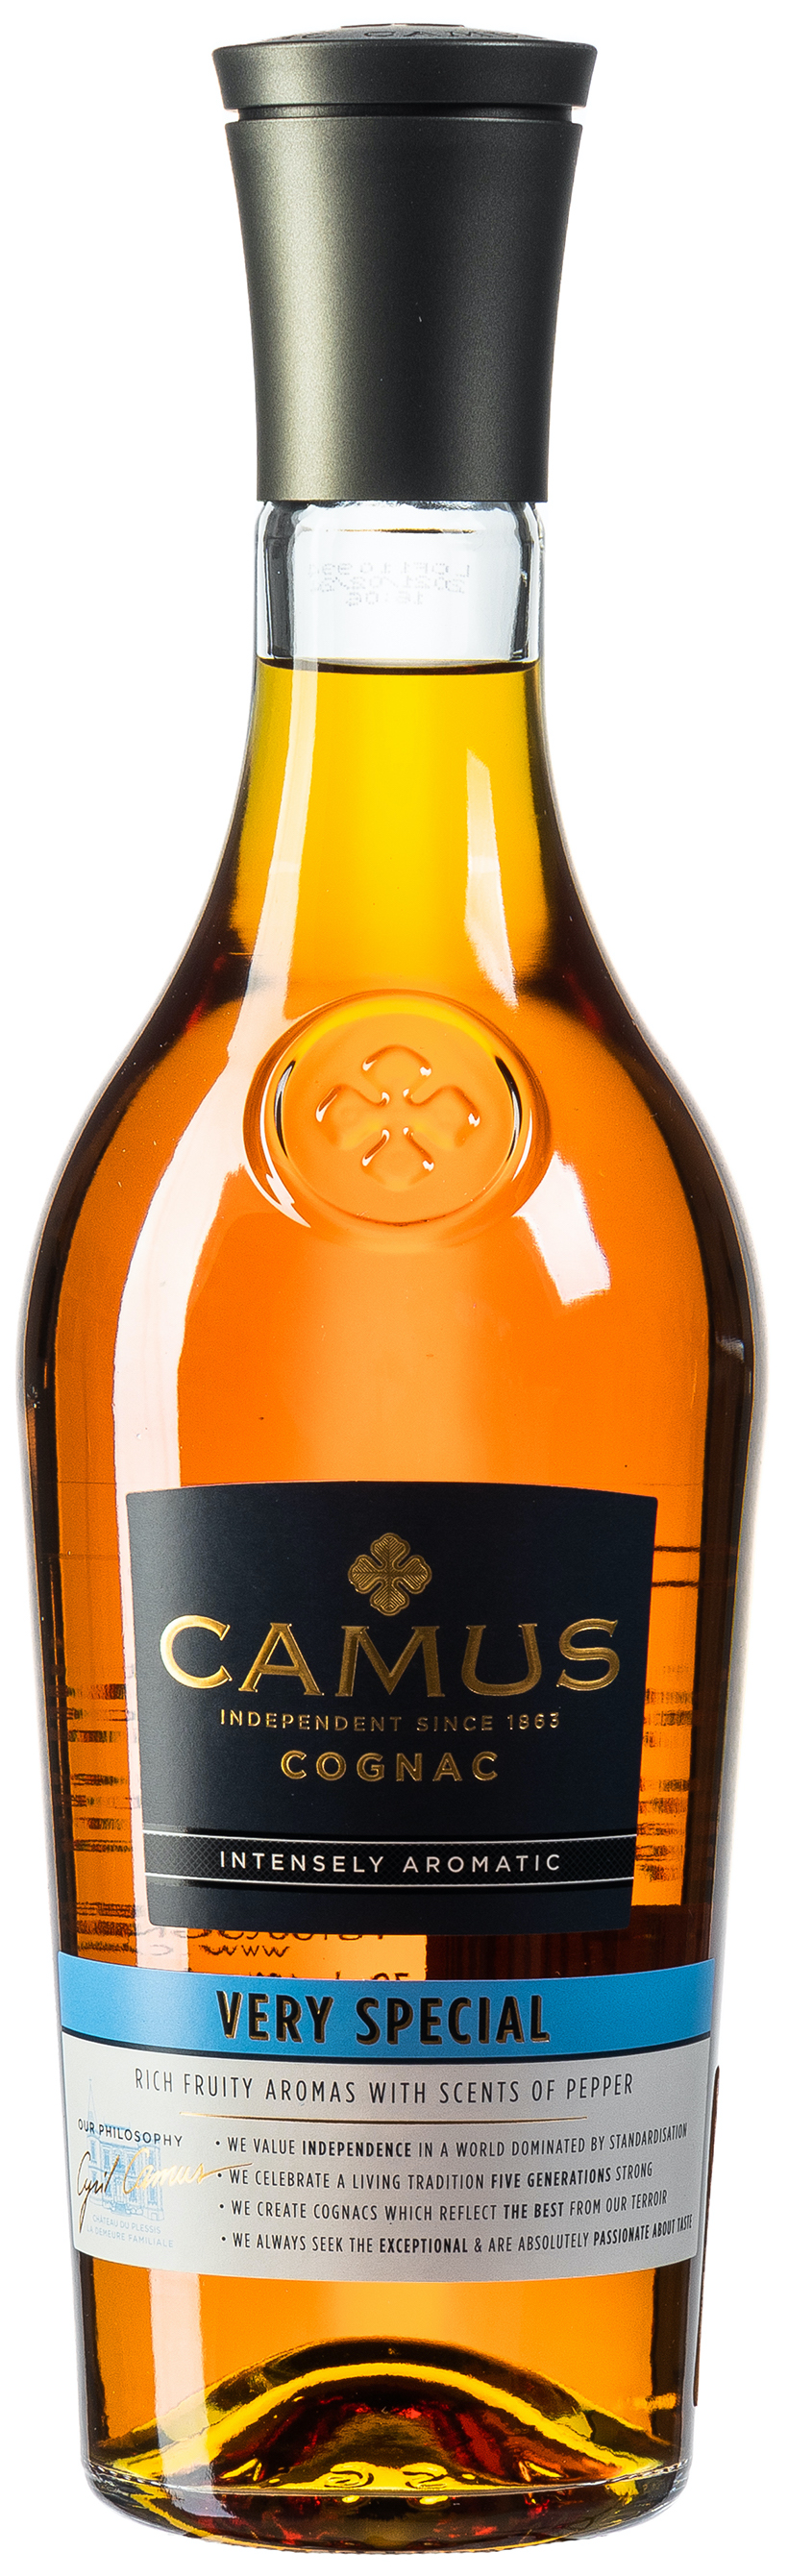 Camus Very Special Intensely Aromatic Cognac 40% vol. 0,70L